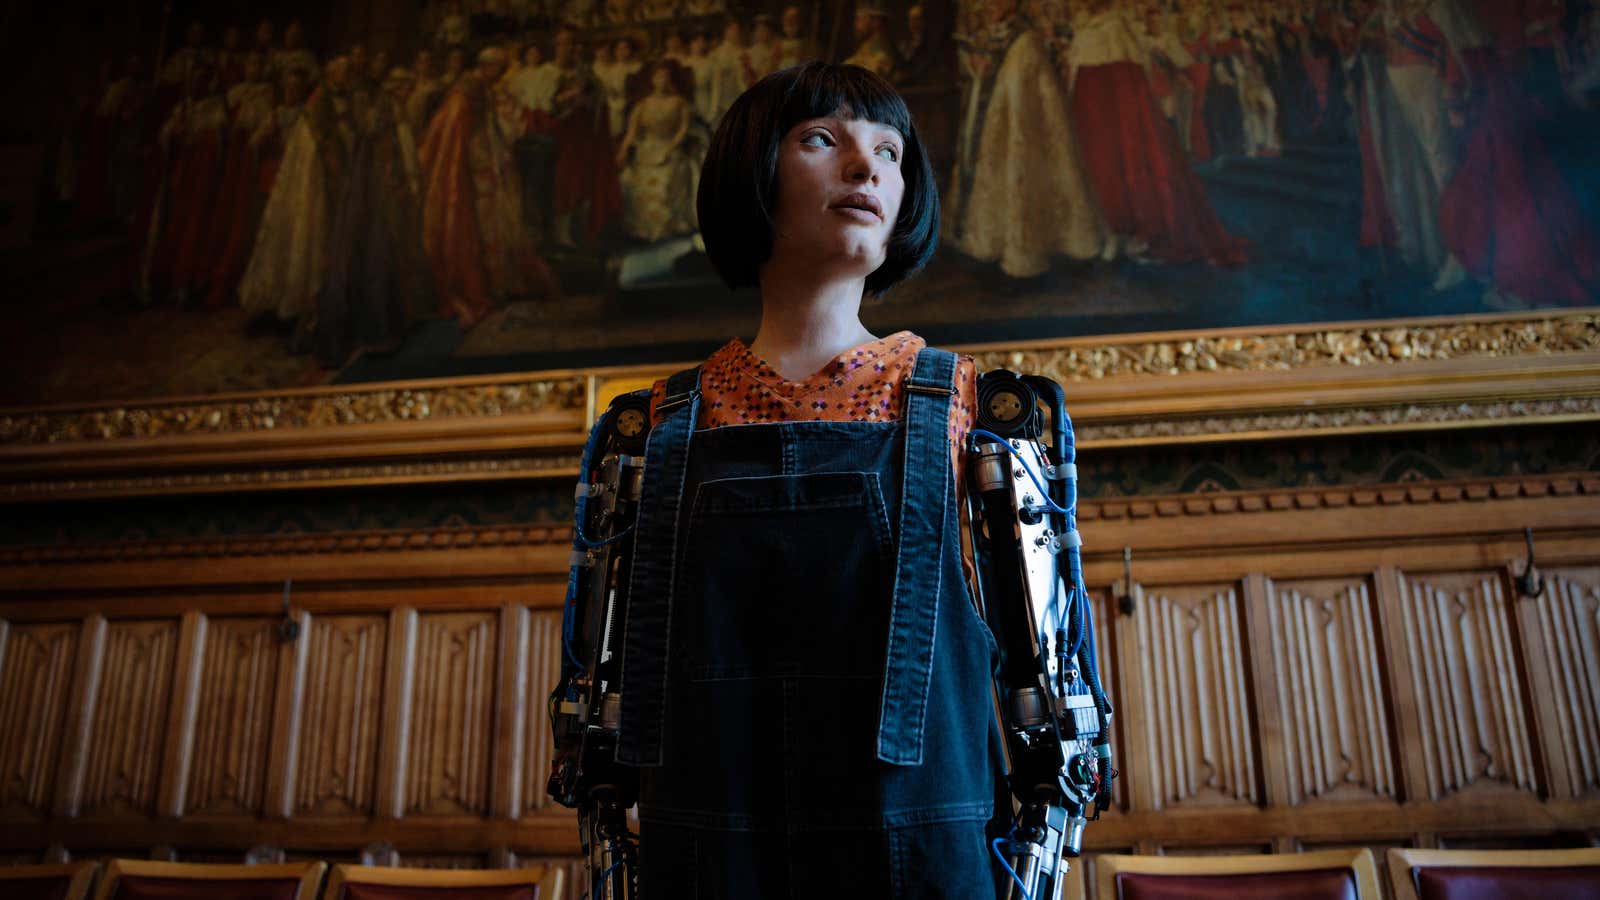 The Ai-Da robot stands inside a meeting room in the House of Lords in London.